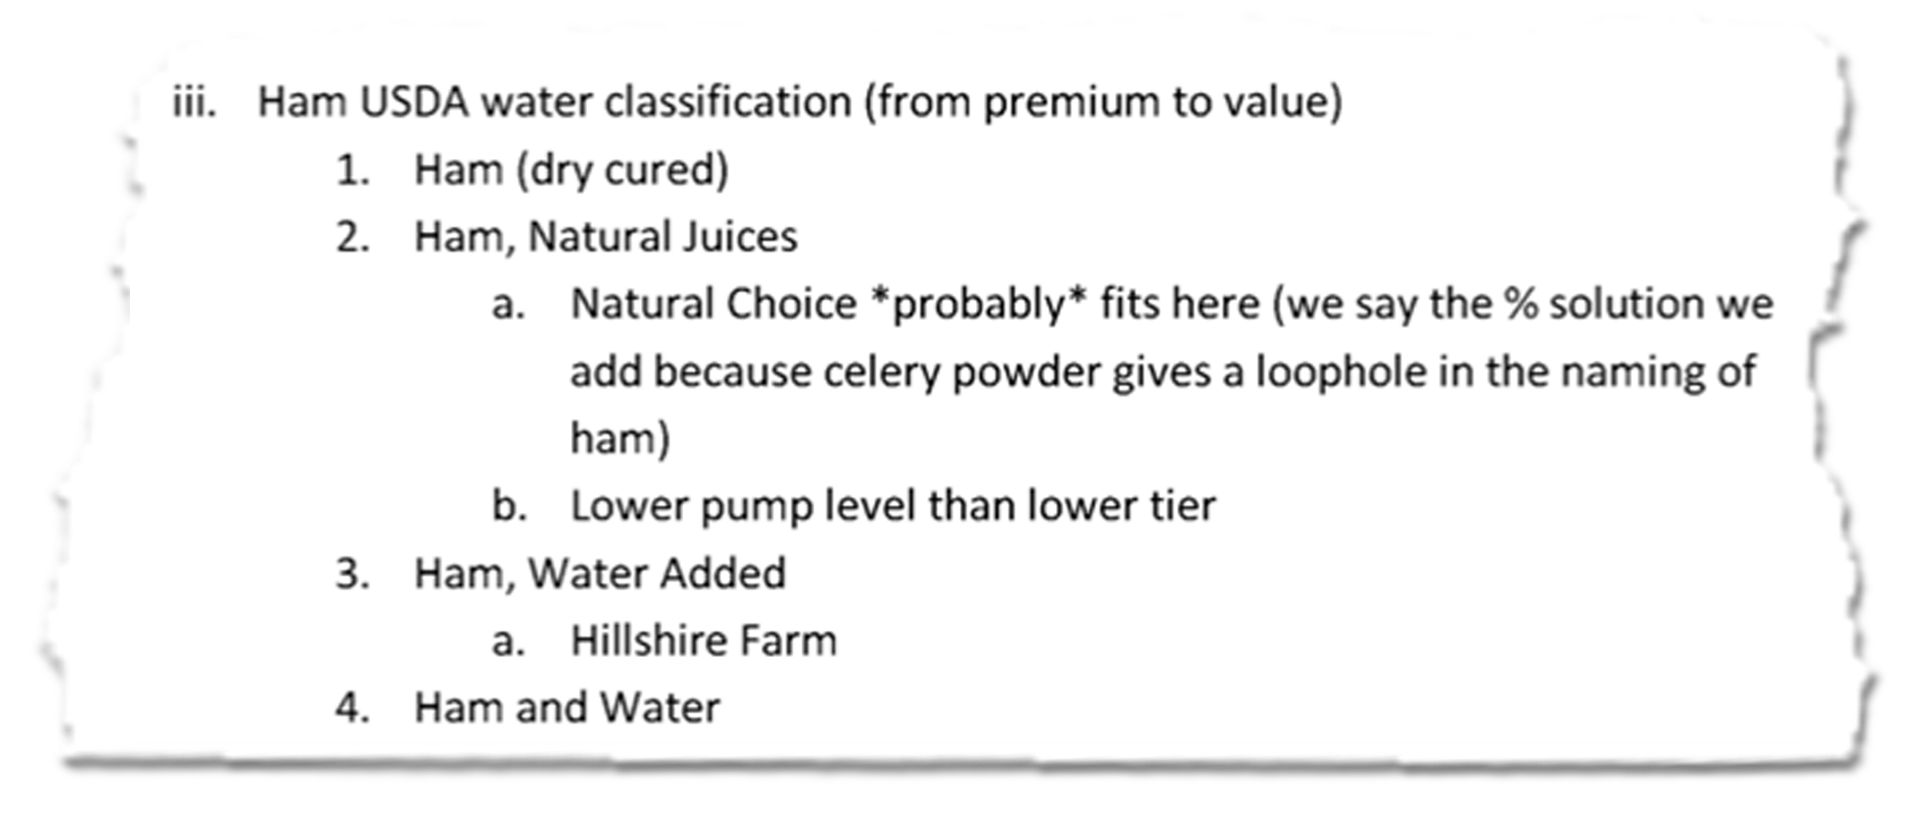 An except of an internal document that segments out varieties of ham based on processing. It lists "Ham USDA water classification from premium to value: ham (dry cured), ham (natural juices) -- natural choice *probably* fits here (we say the % solution we add because celery powder gives a loophole in the naming of ham), lower pump level than lower tier -- ham, water added (hillshire farm), ham and water."